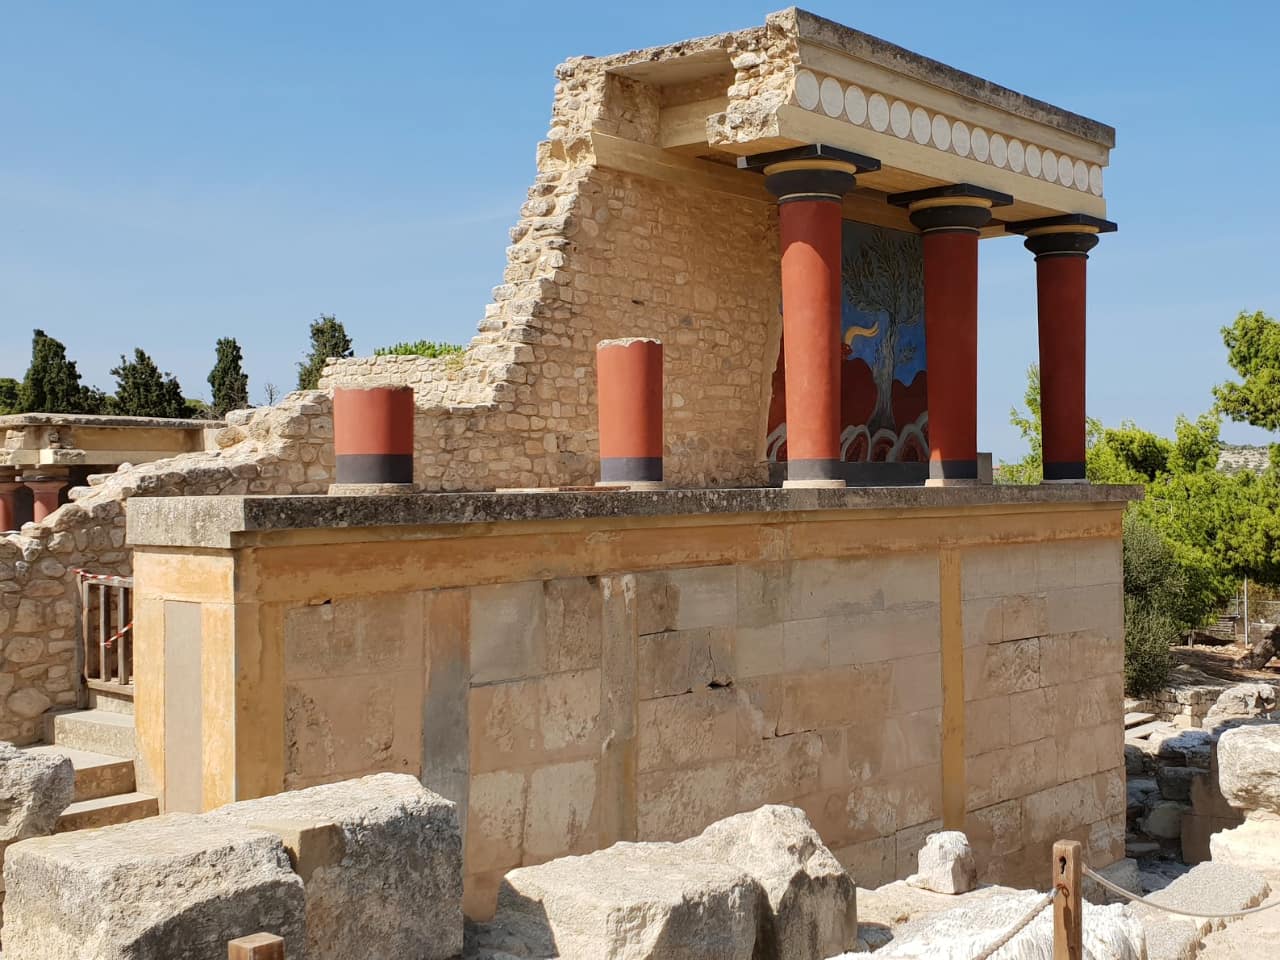 Private Tour to Knossos Minoan Palace, Archaeological Museum departing from Chania, chania best tour to knossos and museum, chania town activities, tour to minoan palace and archaeological museum, museum heraklion small private tour